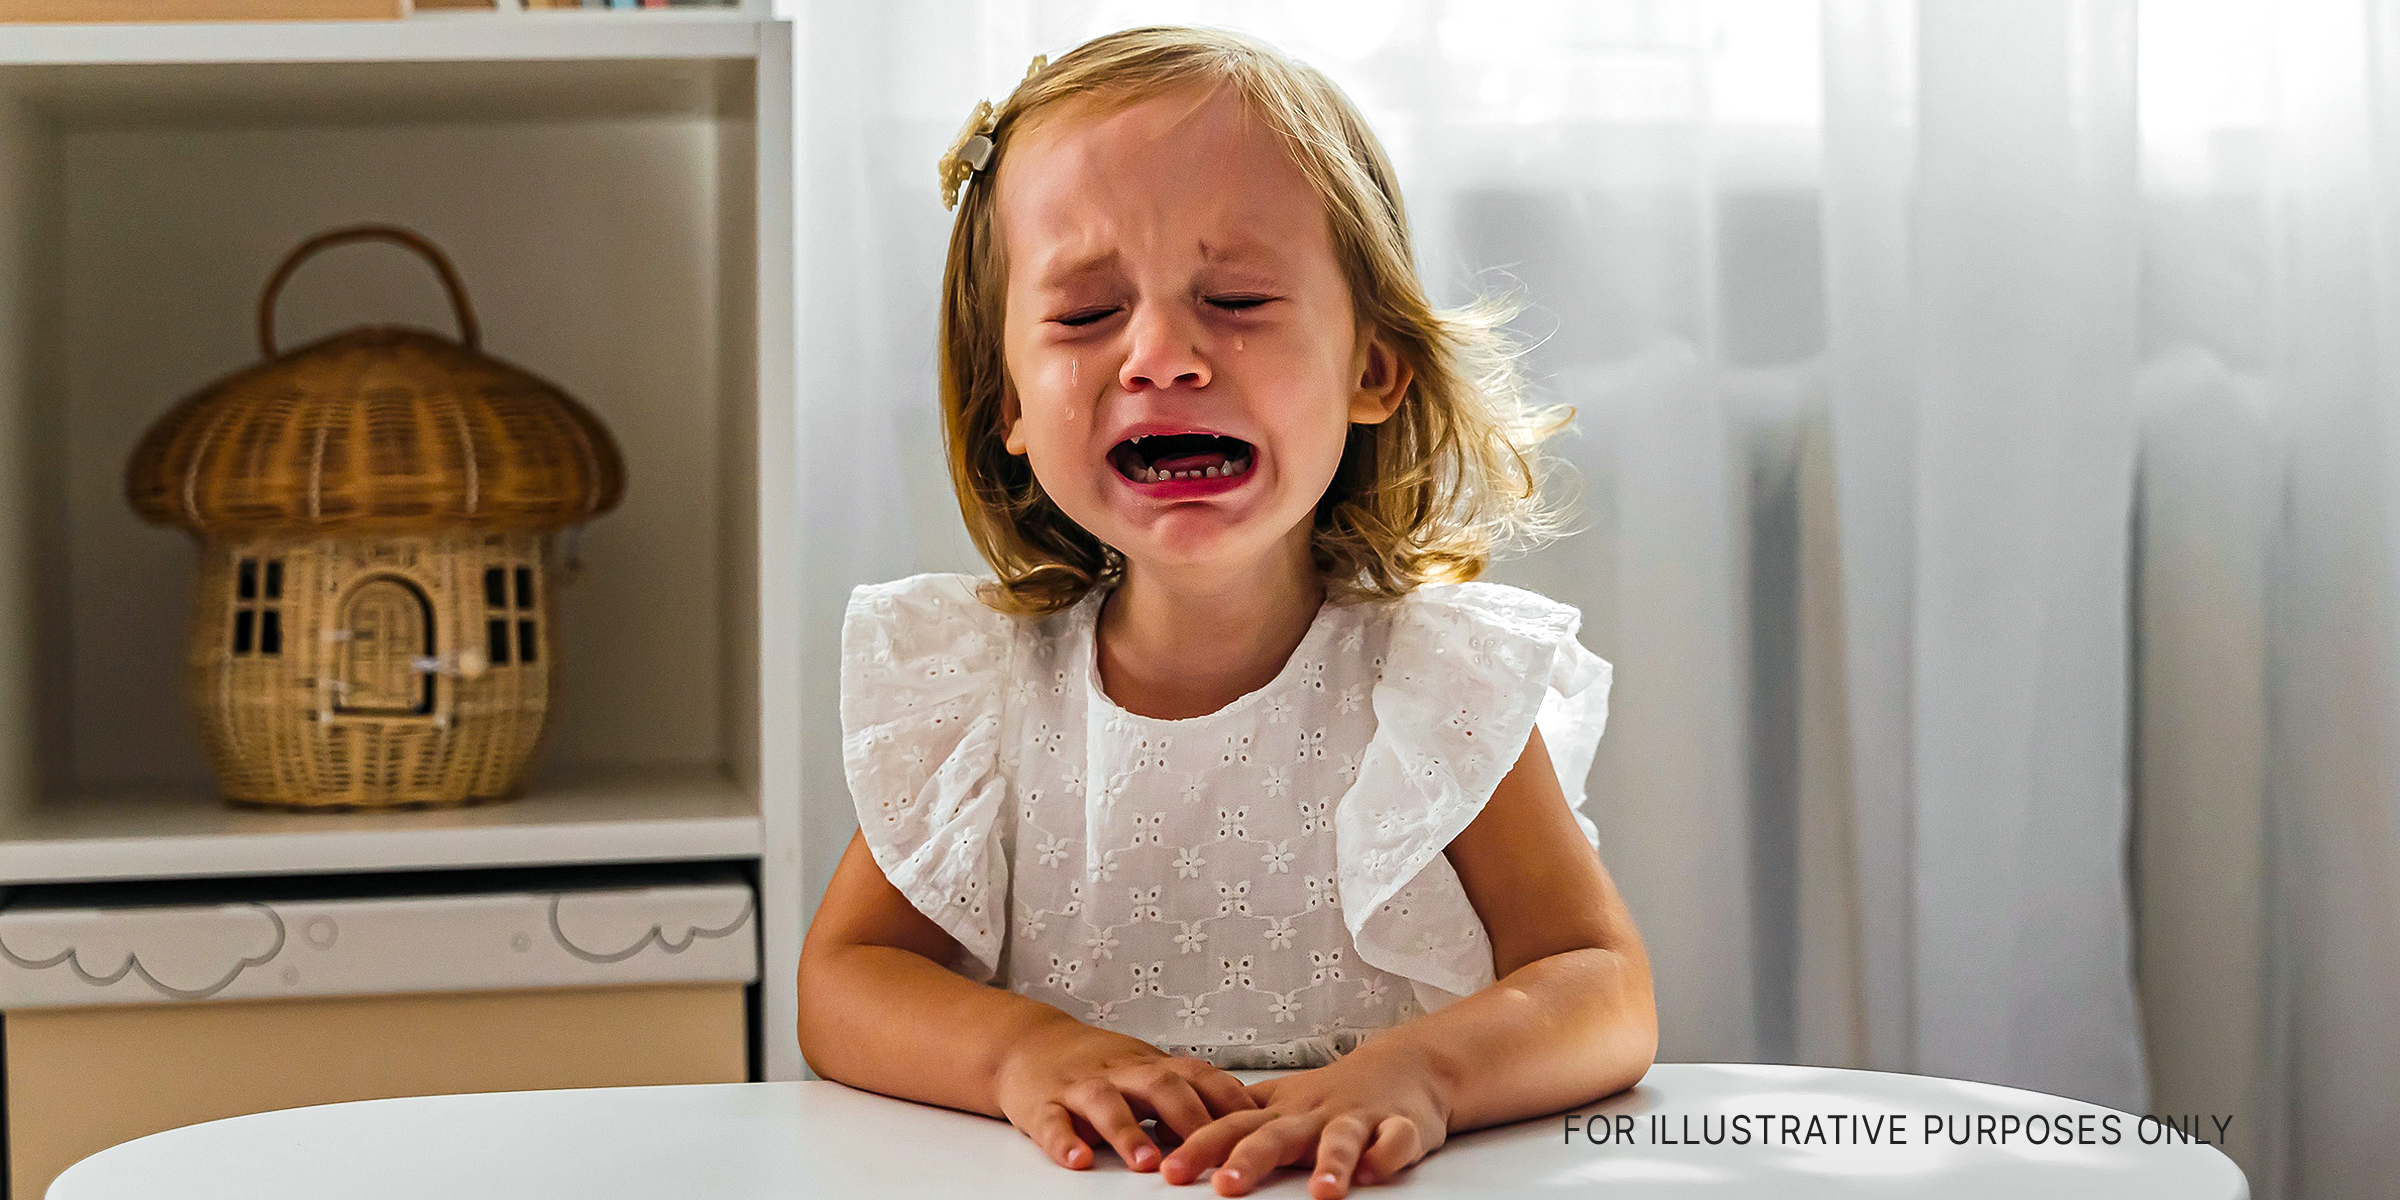 A little girl crying | Source: Getty Images